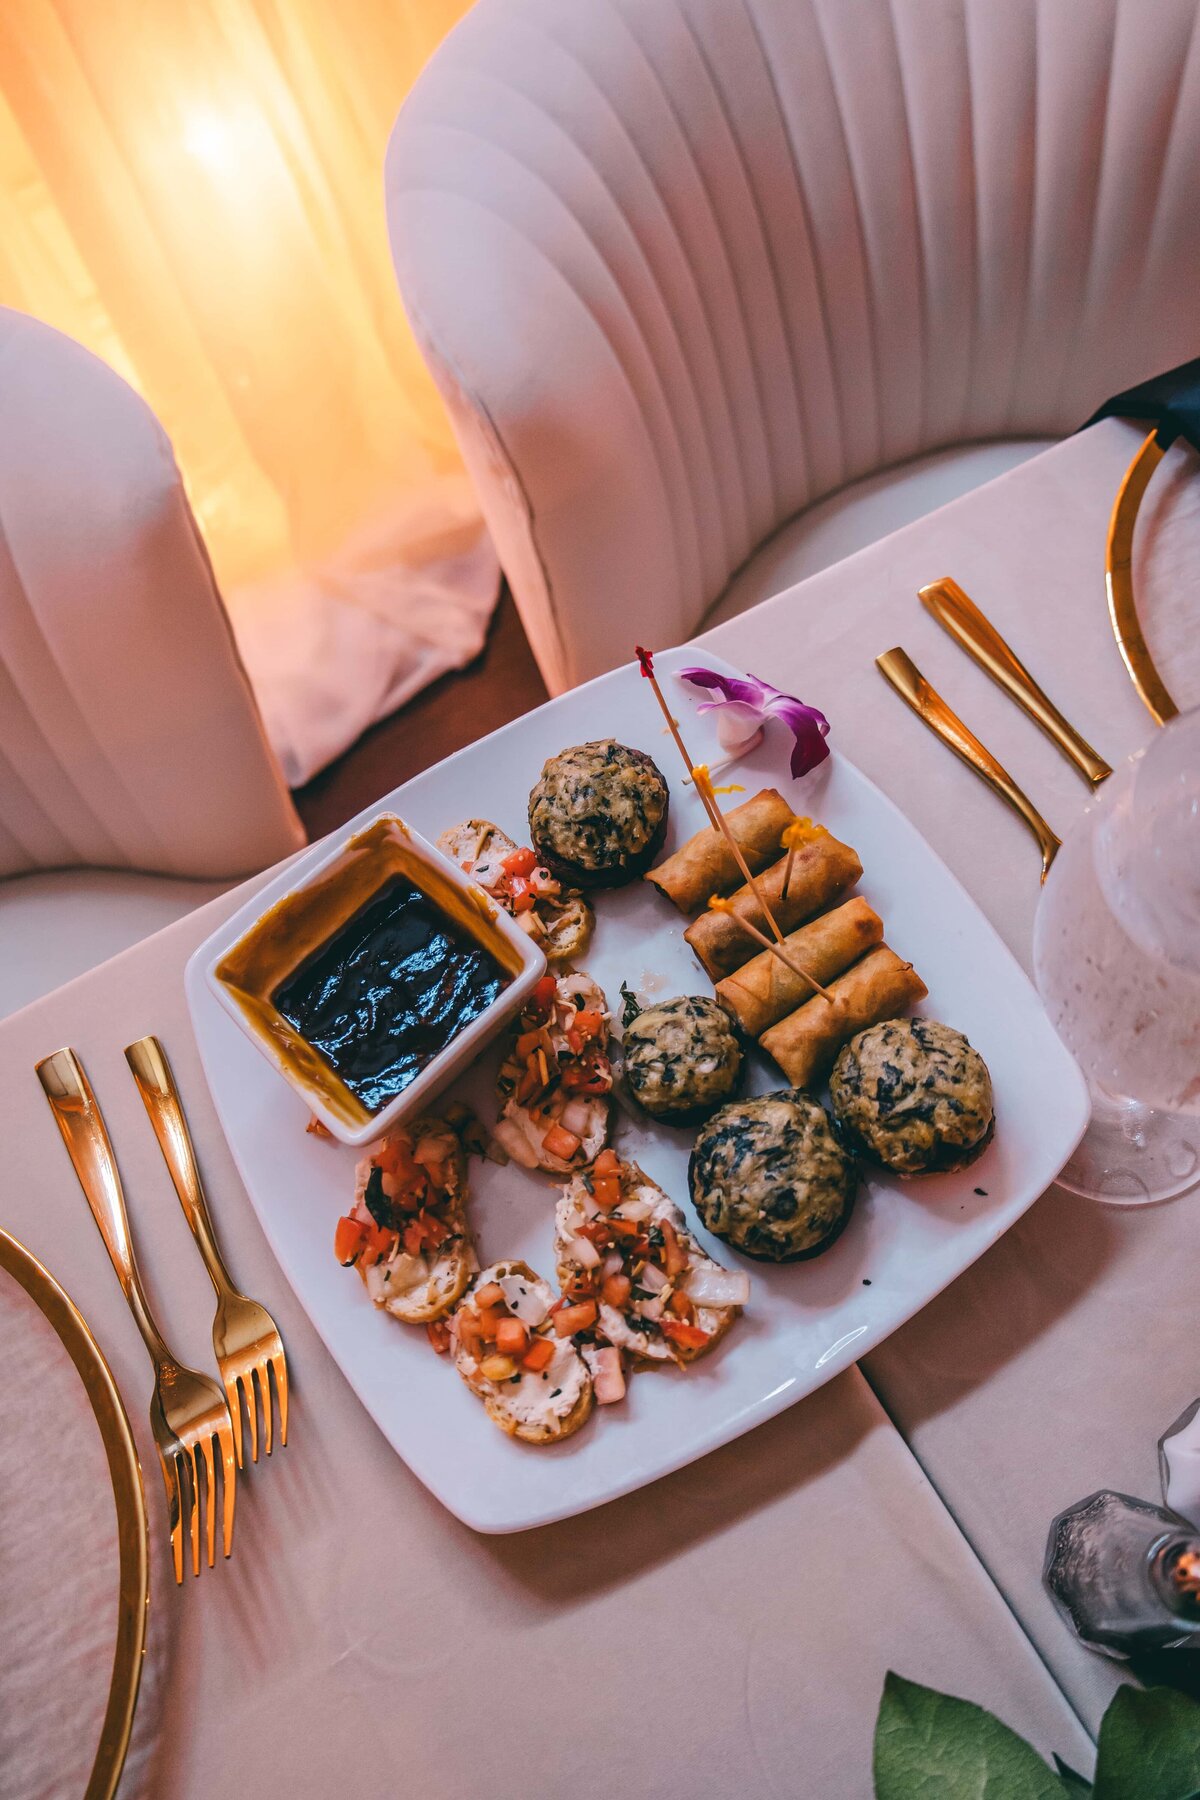 A plate of assorted appetizers including spring rolls, meatballs, and bruschetta, on a table with elegant gold cutlery at a wedding coordinator's showcase in Iowa, against a soft-l